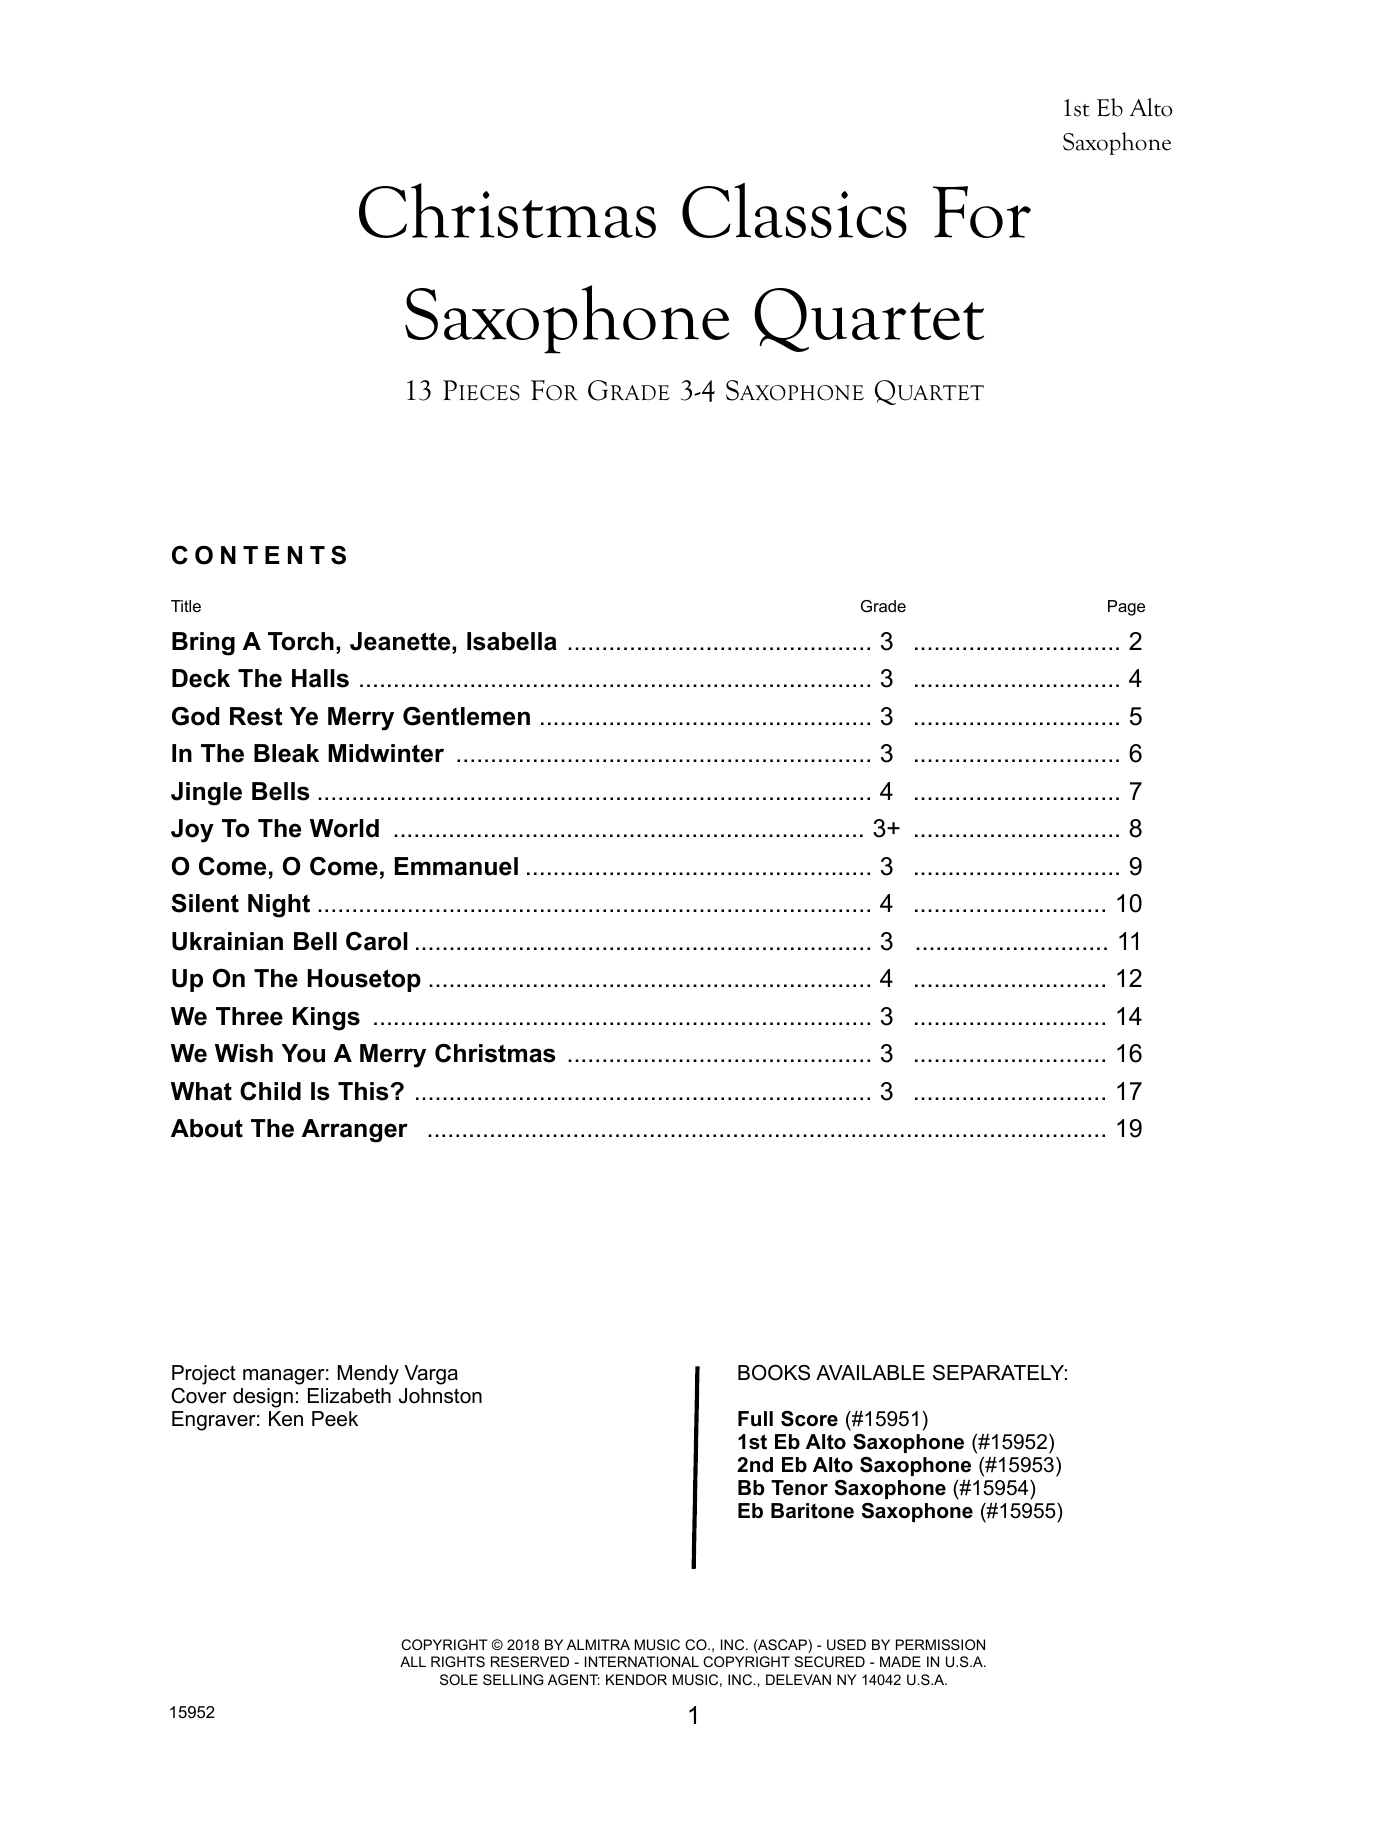 Frank J. Halferty Christmas Classics For Saxophone Quartet - 1st Eb Alto Saxophone sheet music preview music notes and score for Woodwind Ensemble including 18 page(s)